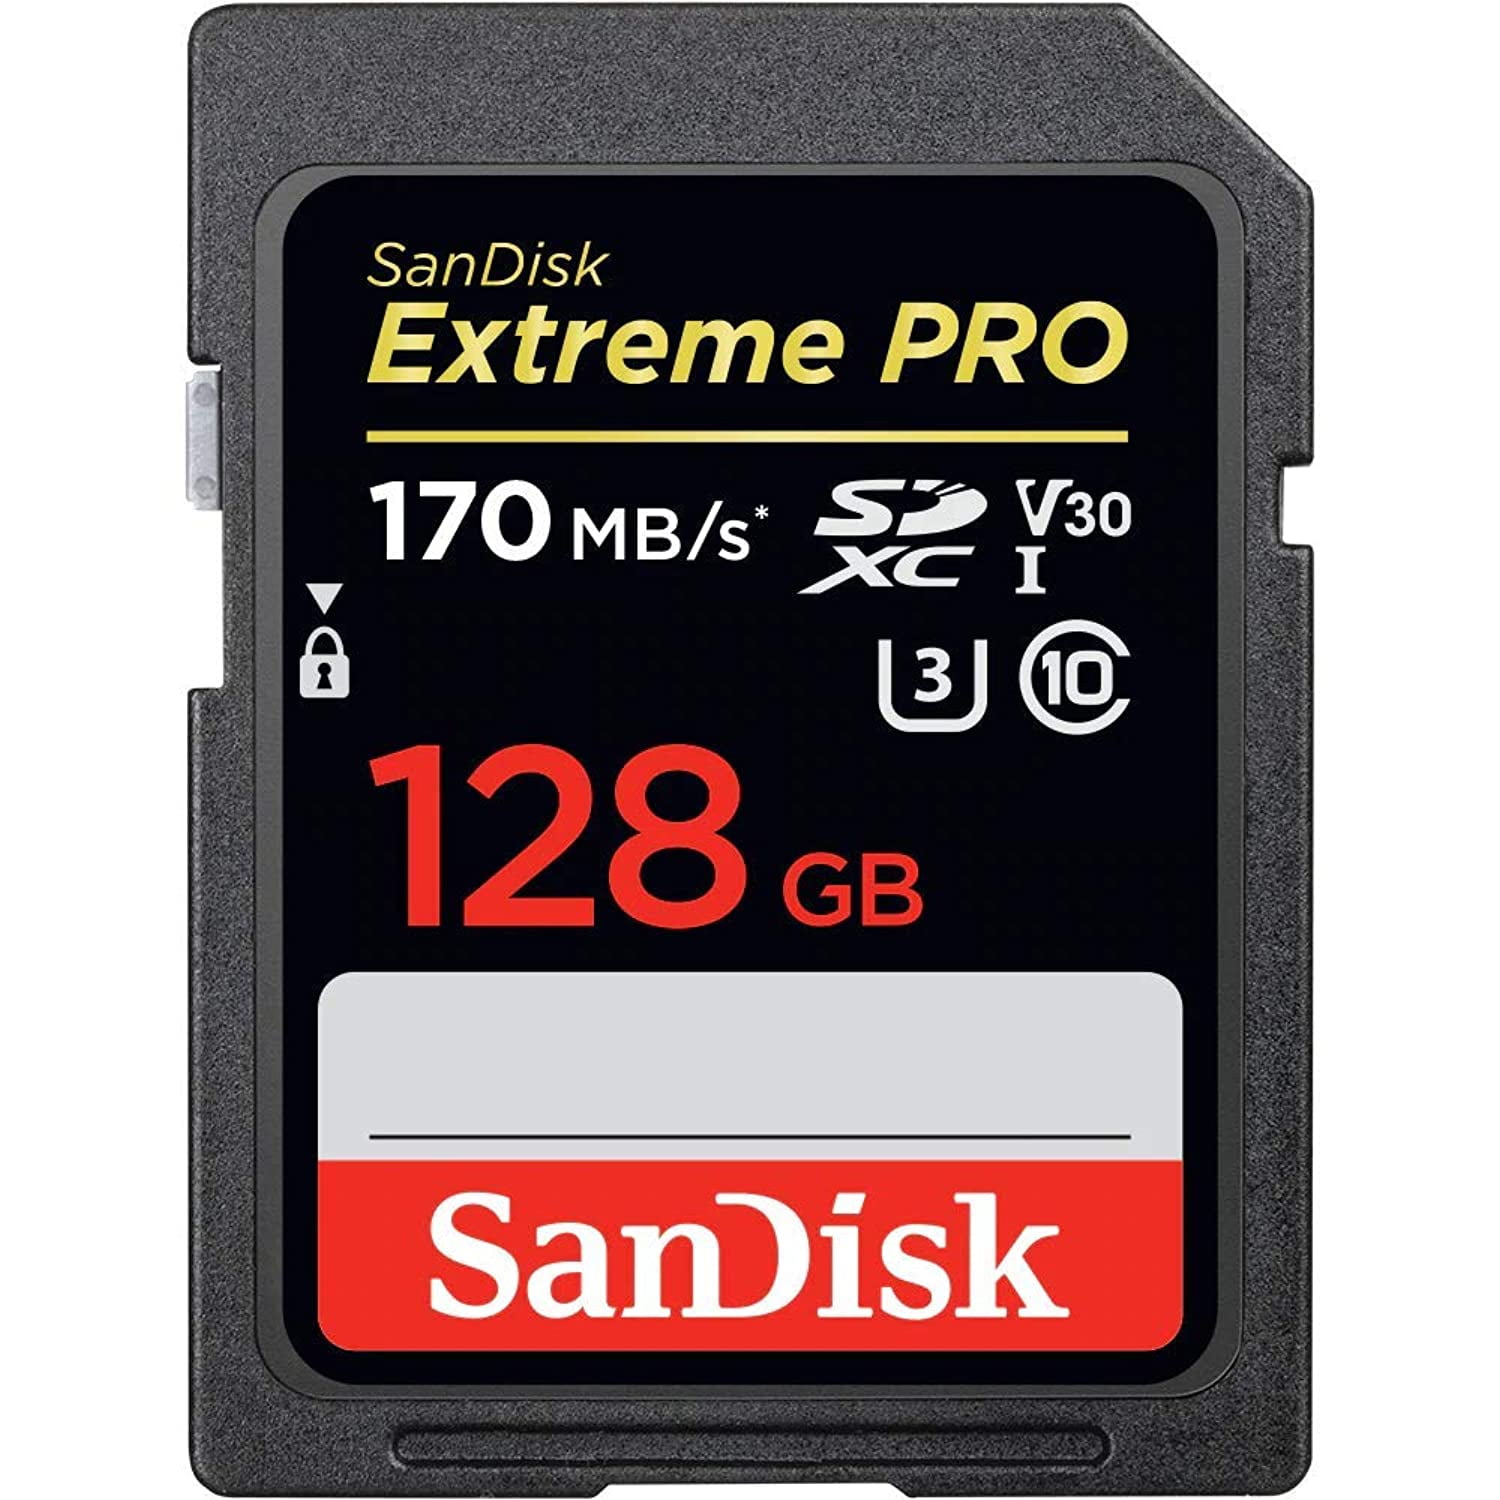 SanDisk Extreme PRO SDXC tarjeta 256GB sdsdxxy 256GGN4IN 170MBs UHSI